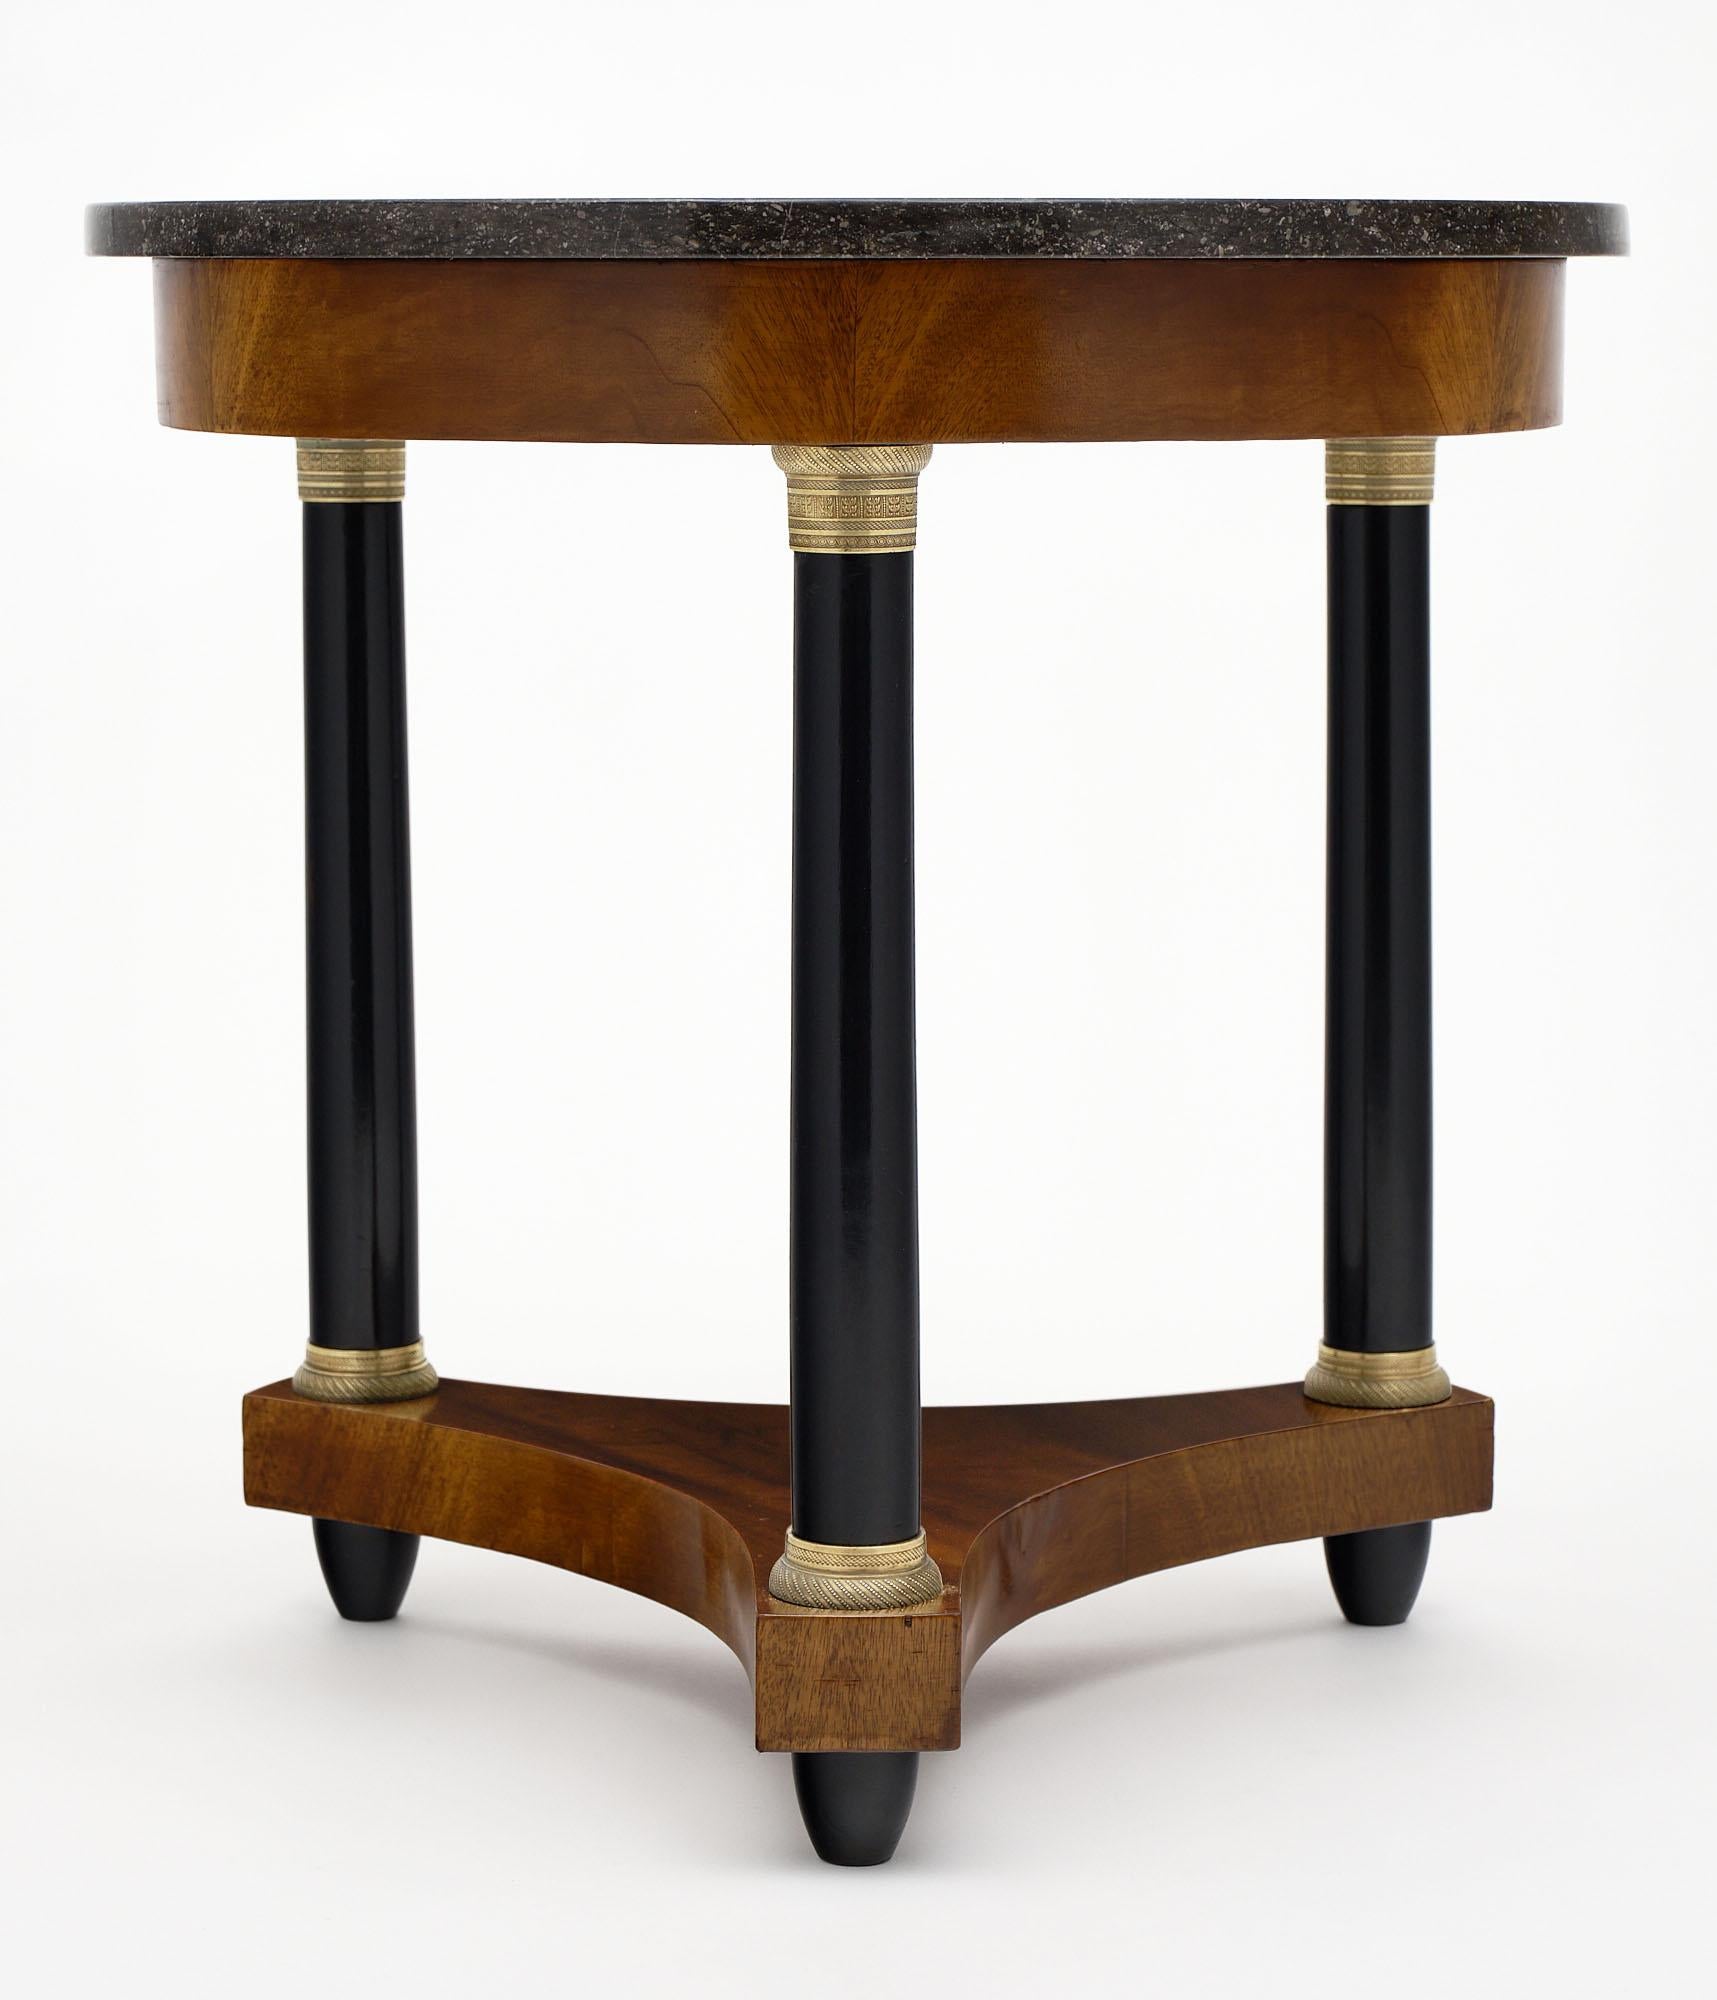 French Empire style gueridon made of mahogany and finished with a lustrous French polish. We love the Saint-Anne marble top and the three ebonized legs with finely cast bronzes. This piece brings Classic French style!